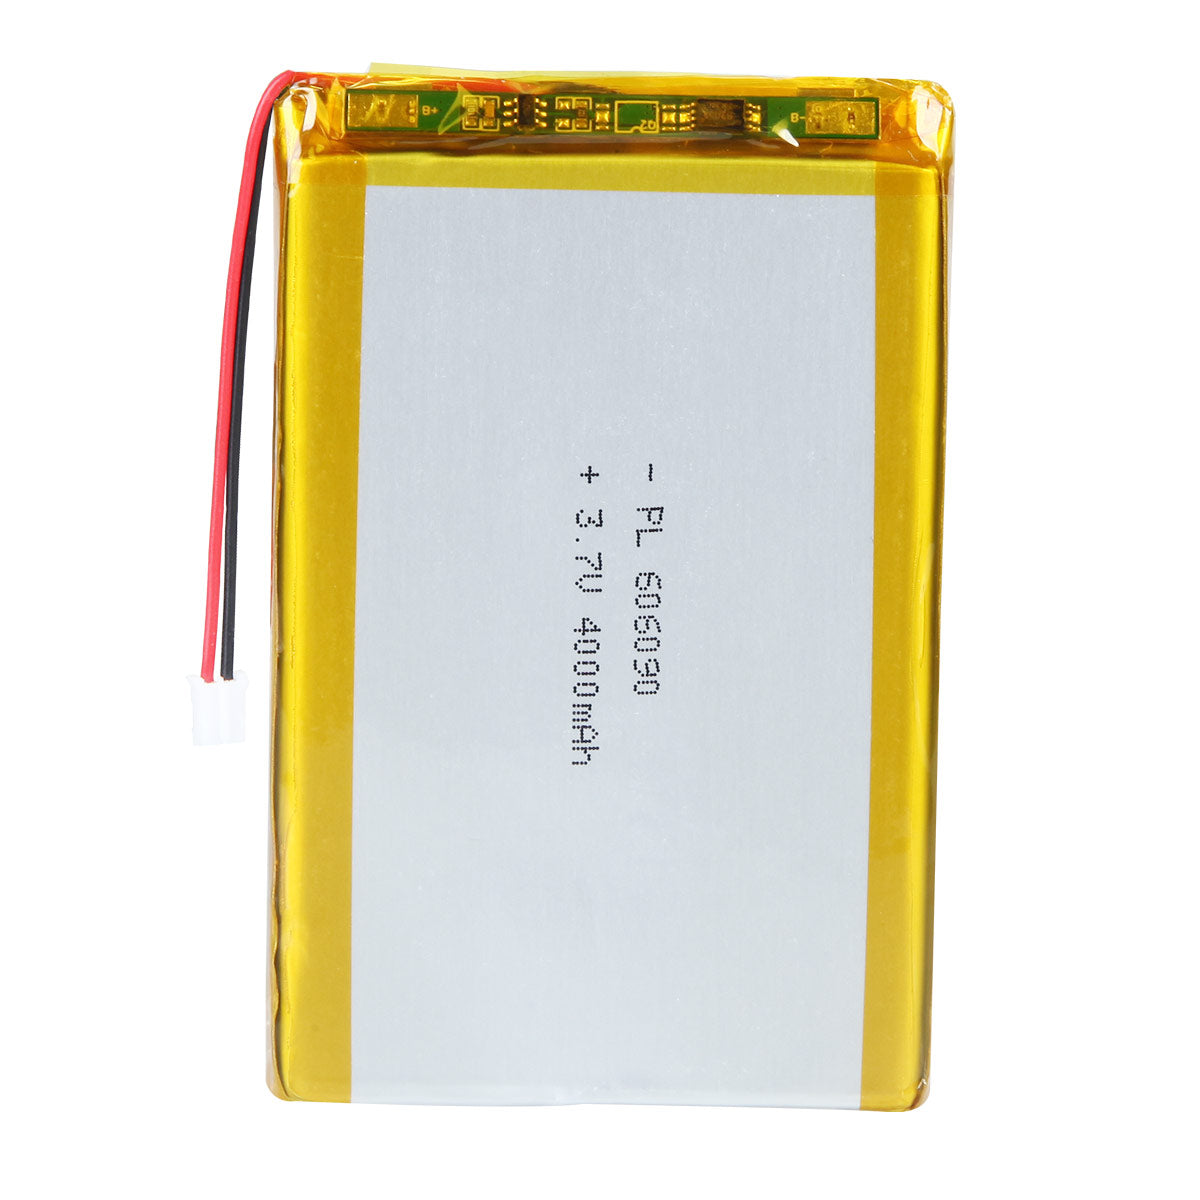 YDL 3.7V 4000mAh 606090 Rechargeable Lithium Polymer Battery